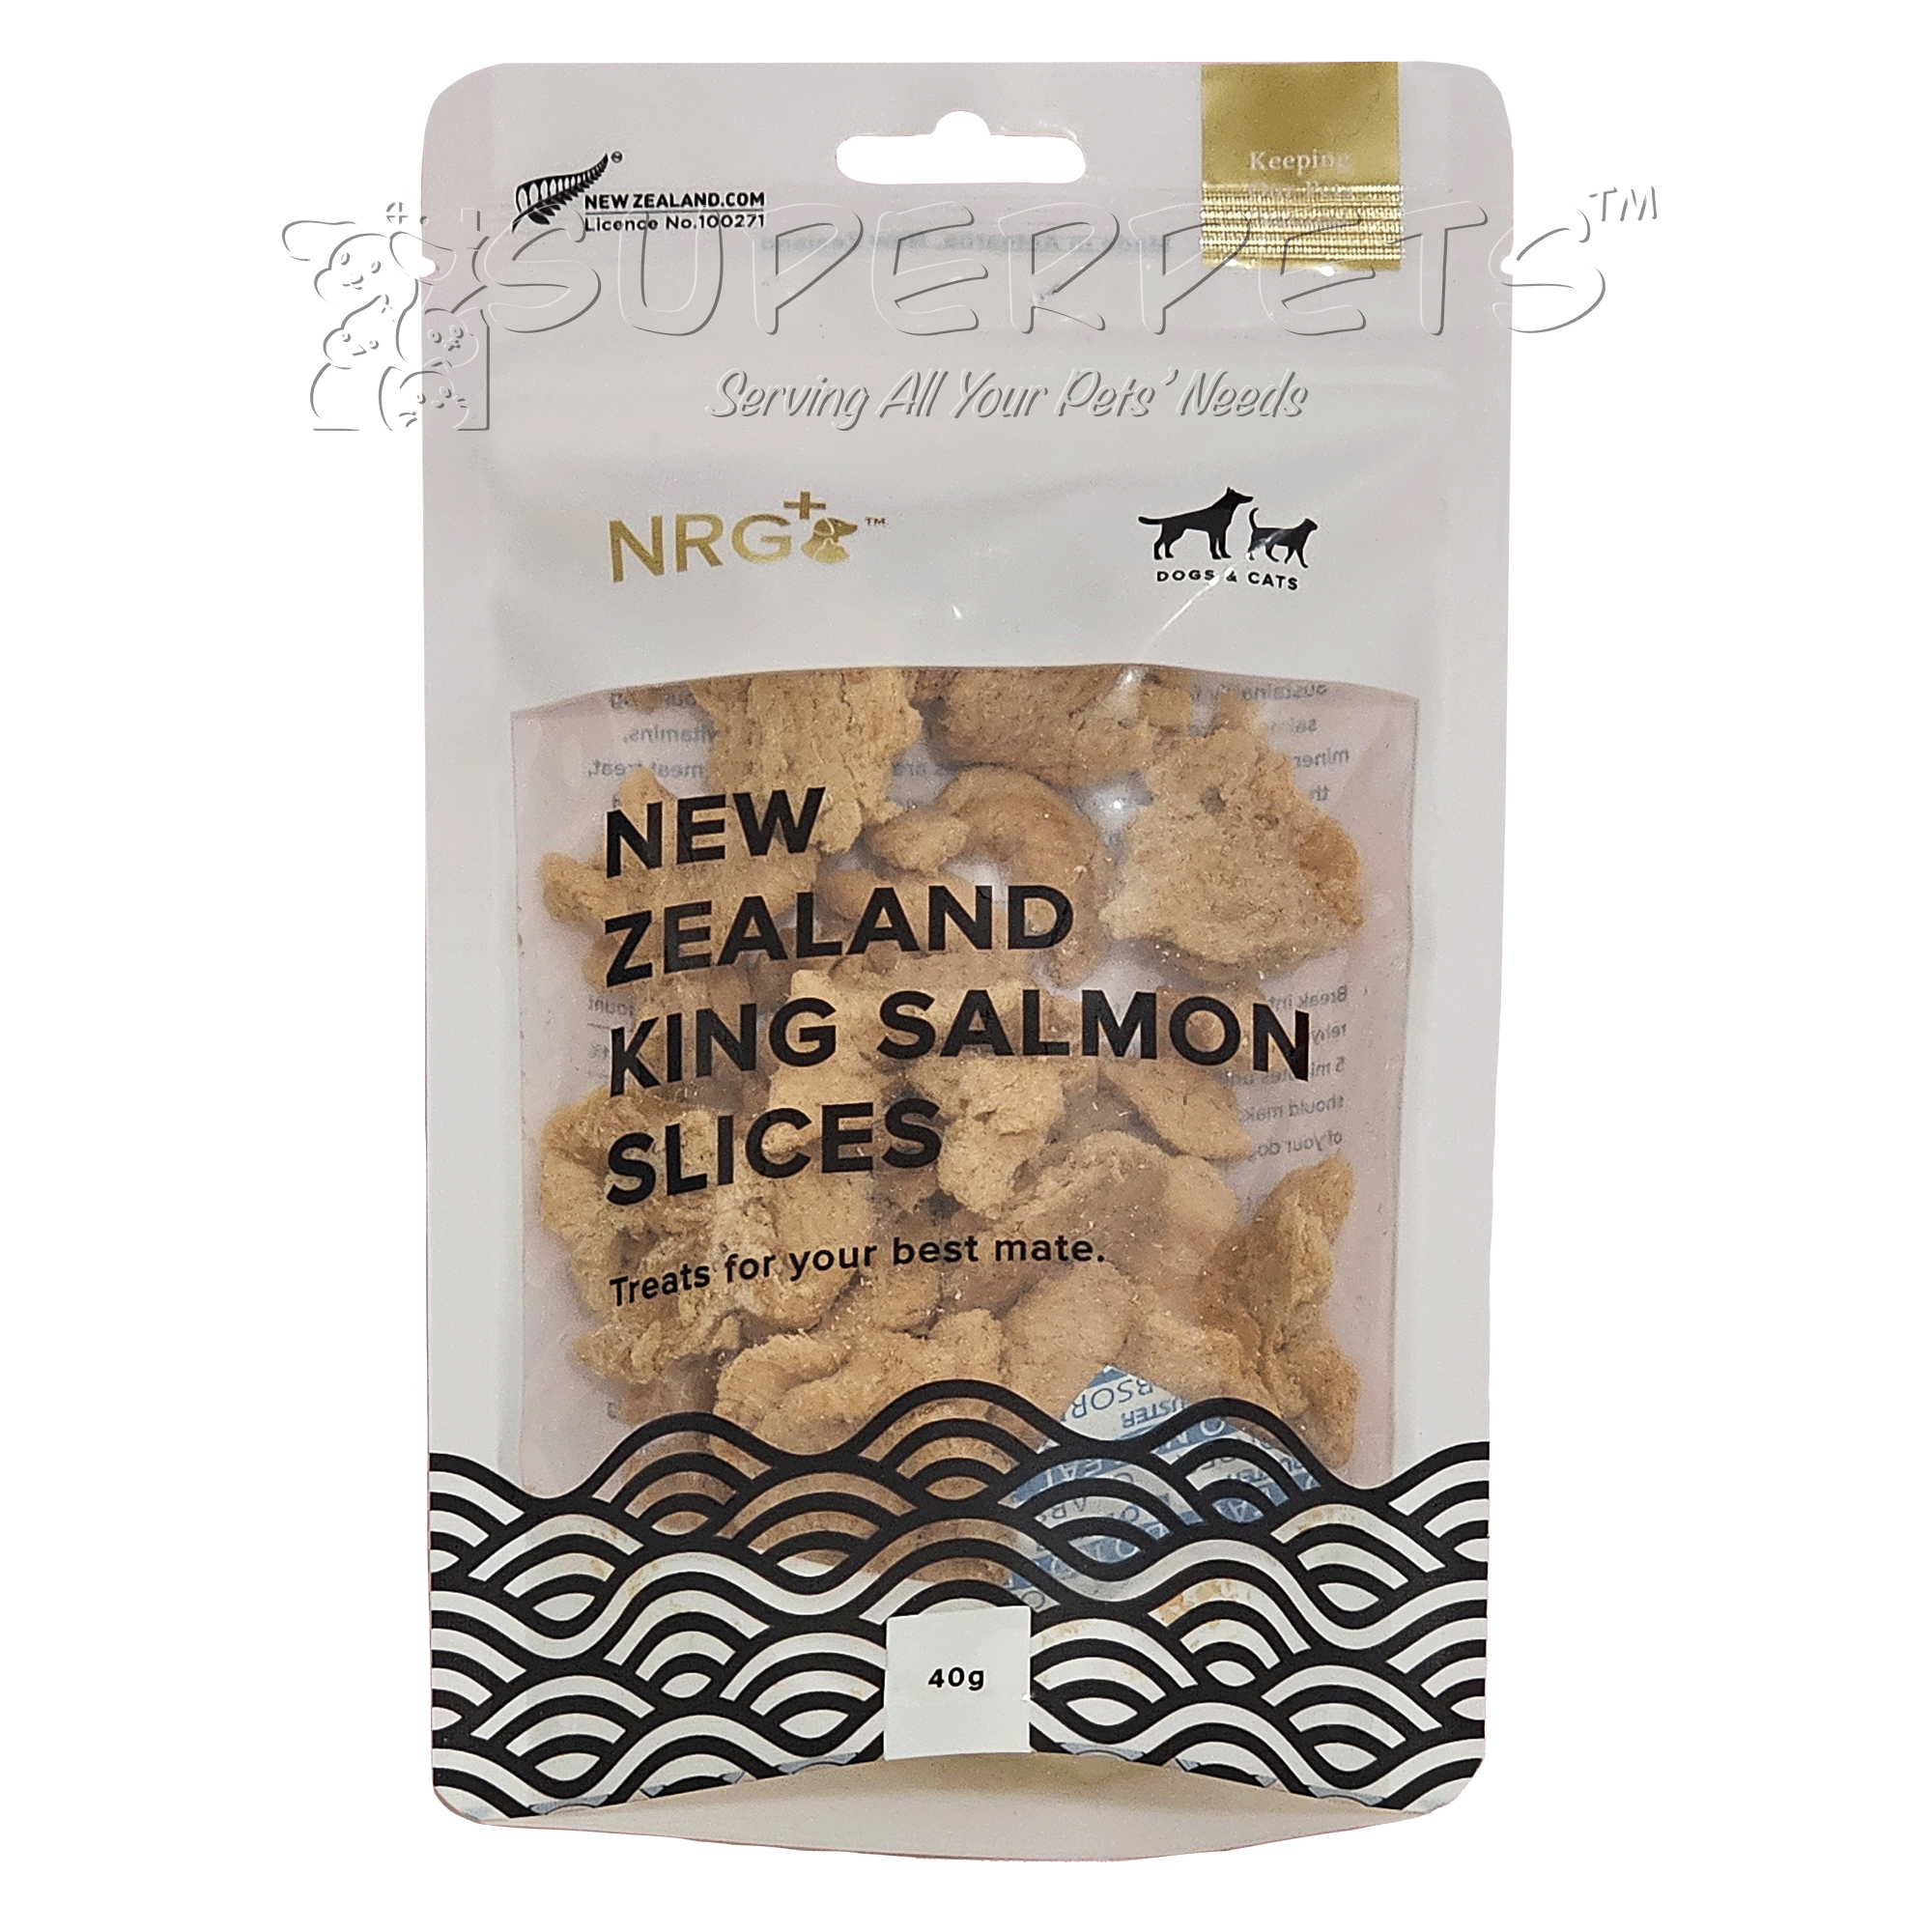 NRG+ - Freeze Dried - New Zealand King Salmon Slices 40g (For Cats and Dogs)